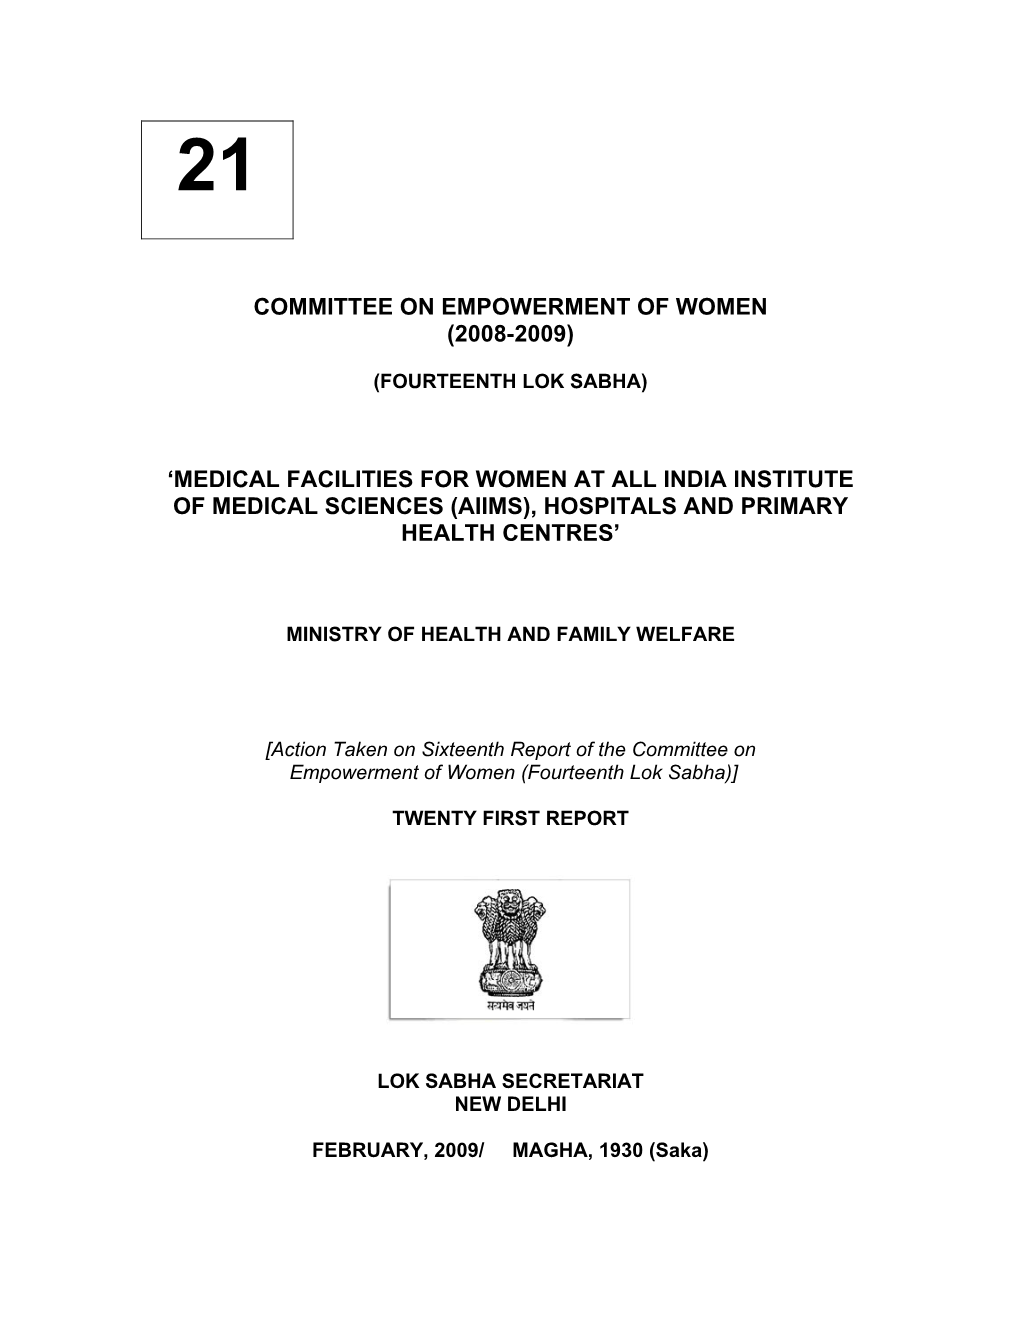 Medical Facilities for Women at All India Institute of Medical Sciences (Aiims), Hospitals and Primary Health Centres’